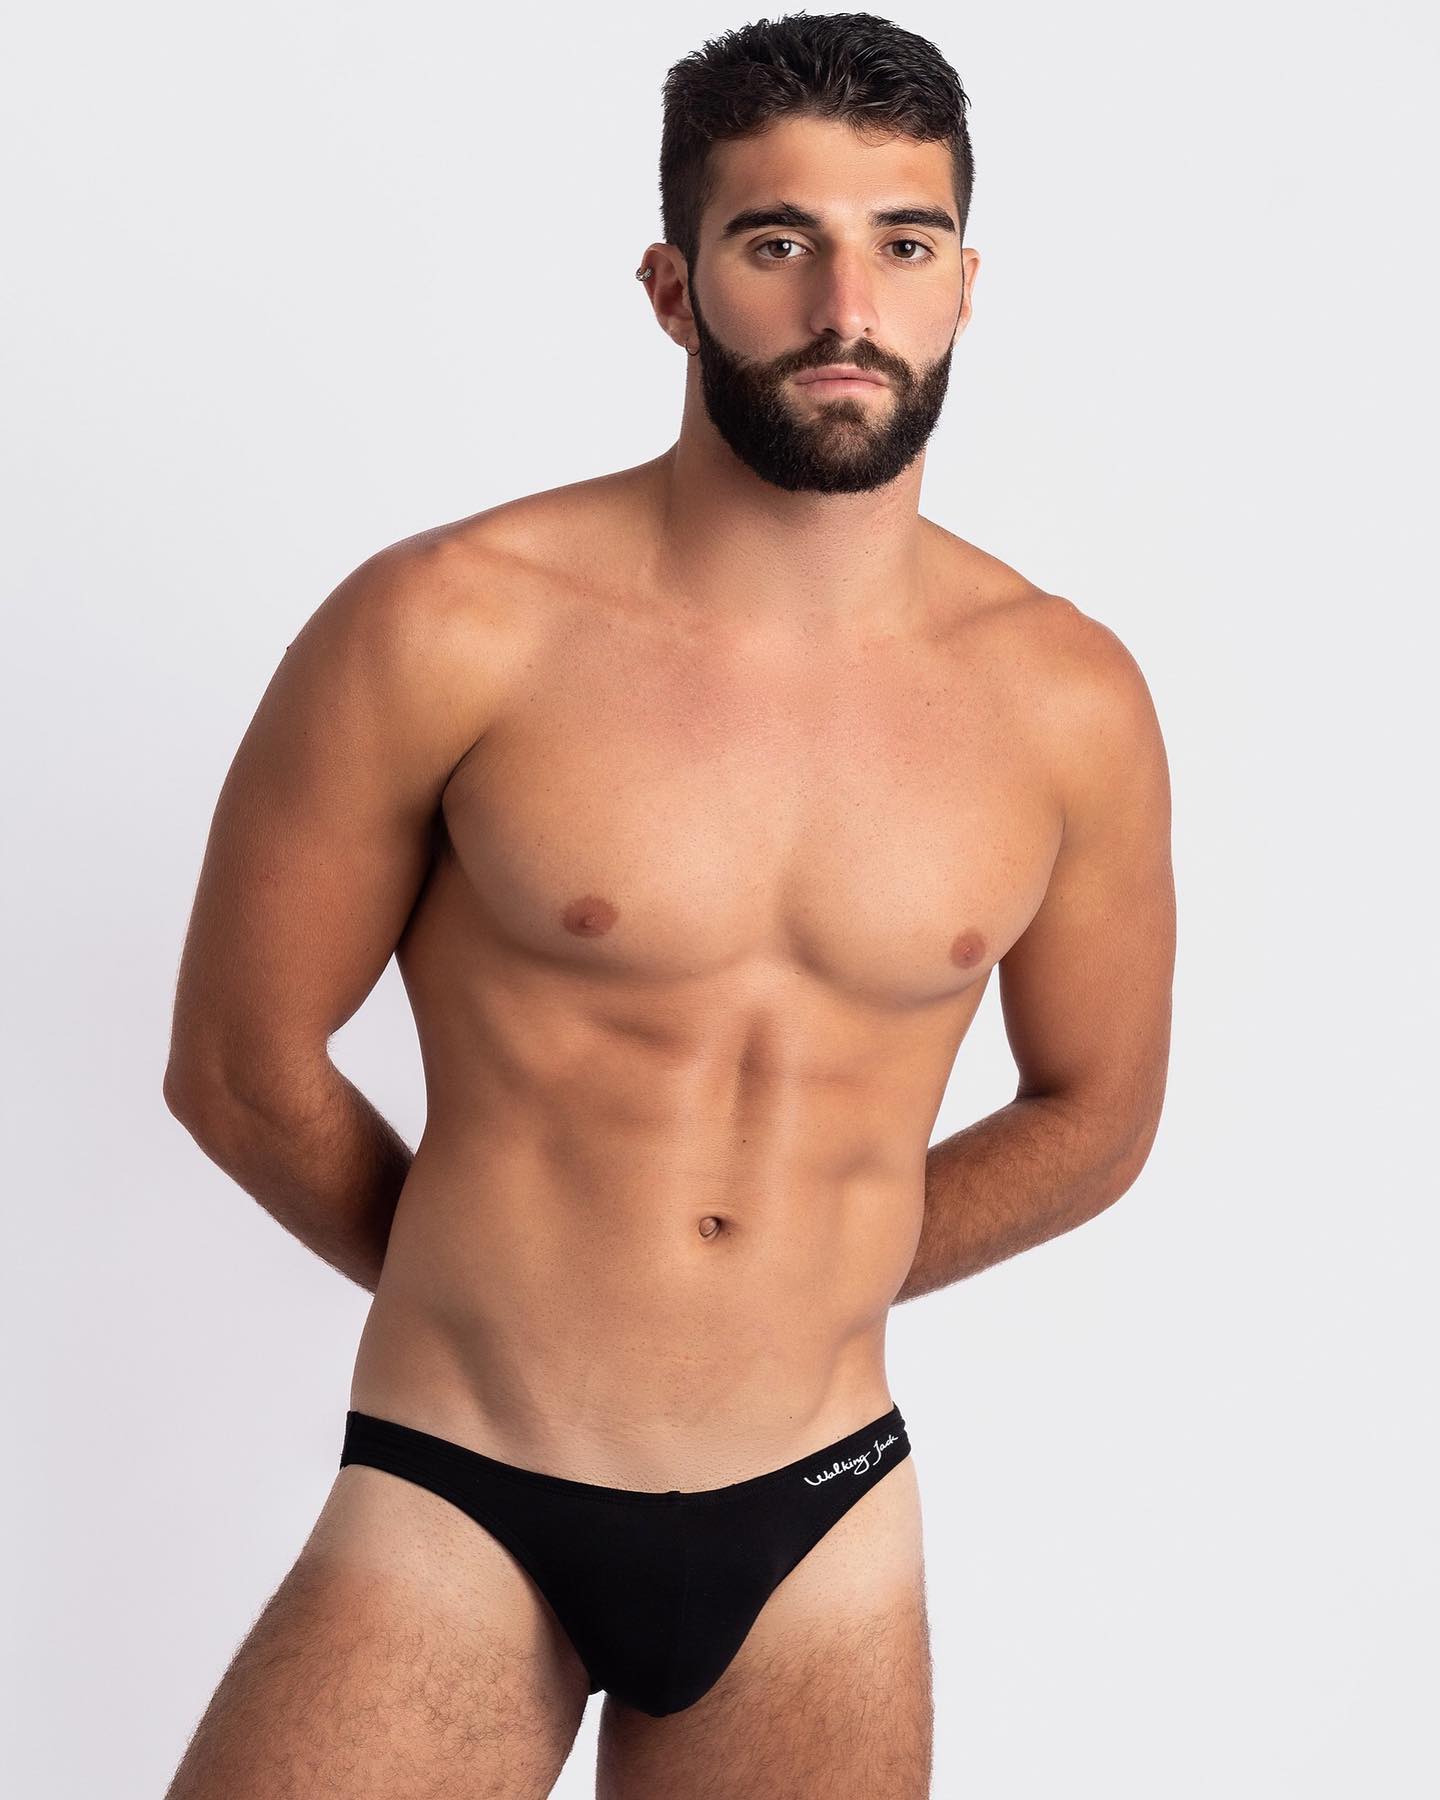 New, sexy and incredibly stylish! The Micro Briefs by Walking Jack in navy blue are selling out fast! Get them today:
_____
menandunderwear.com/shop